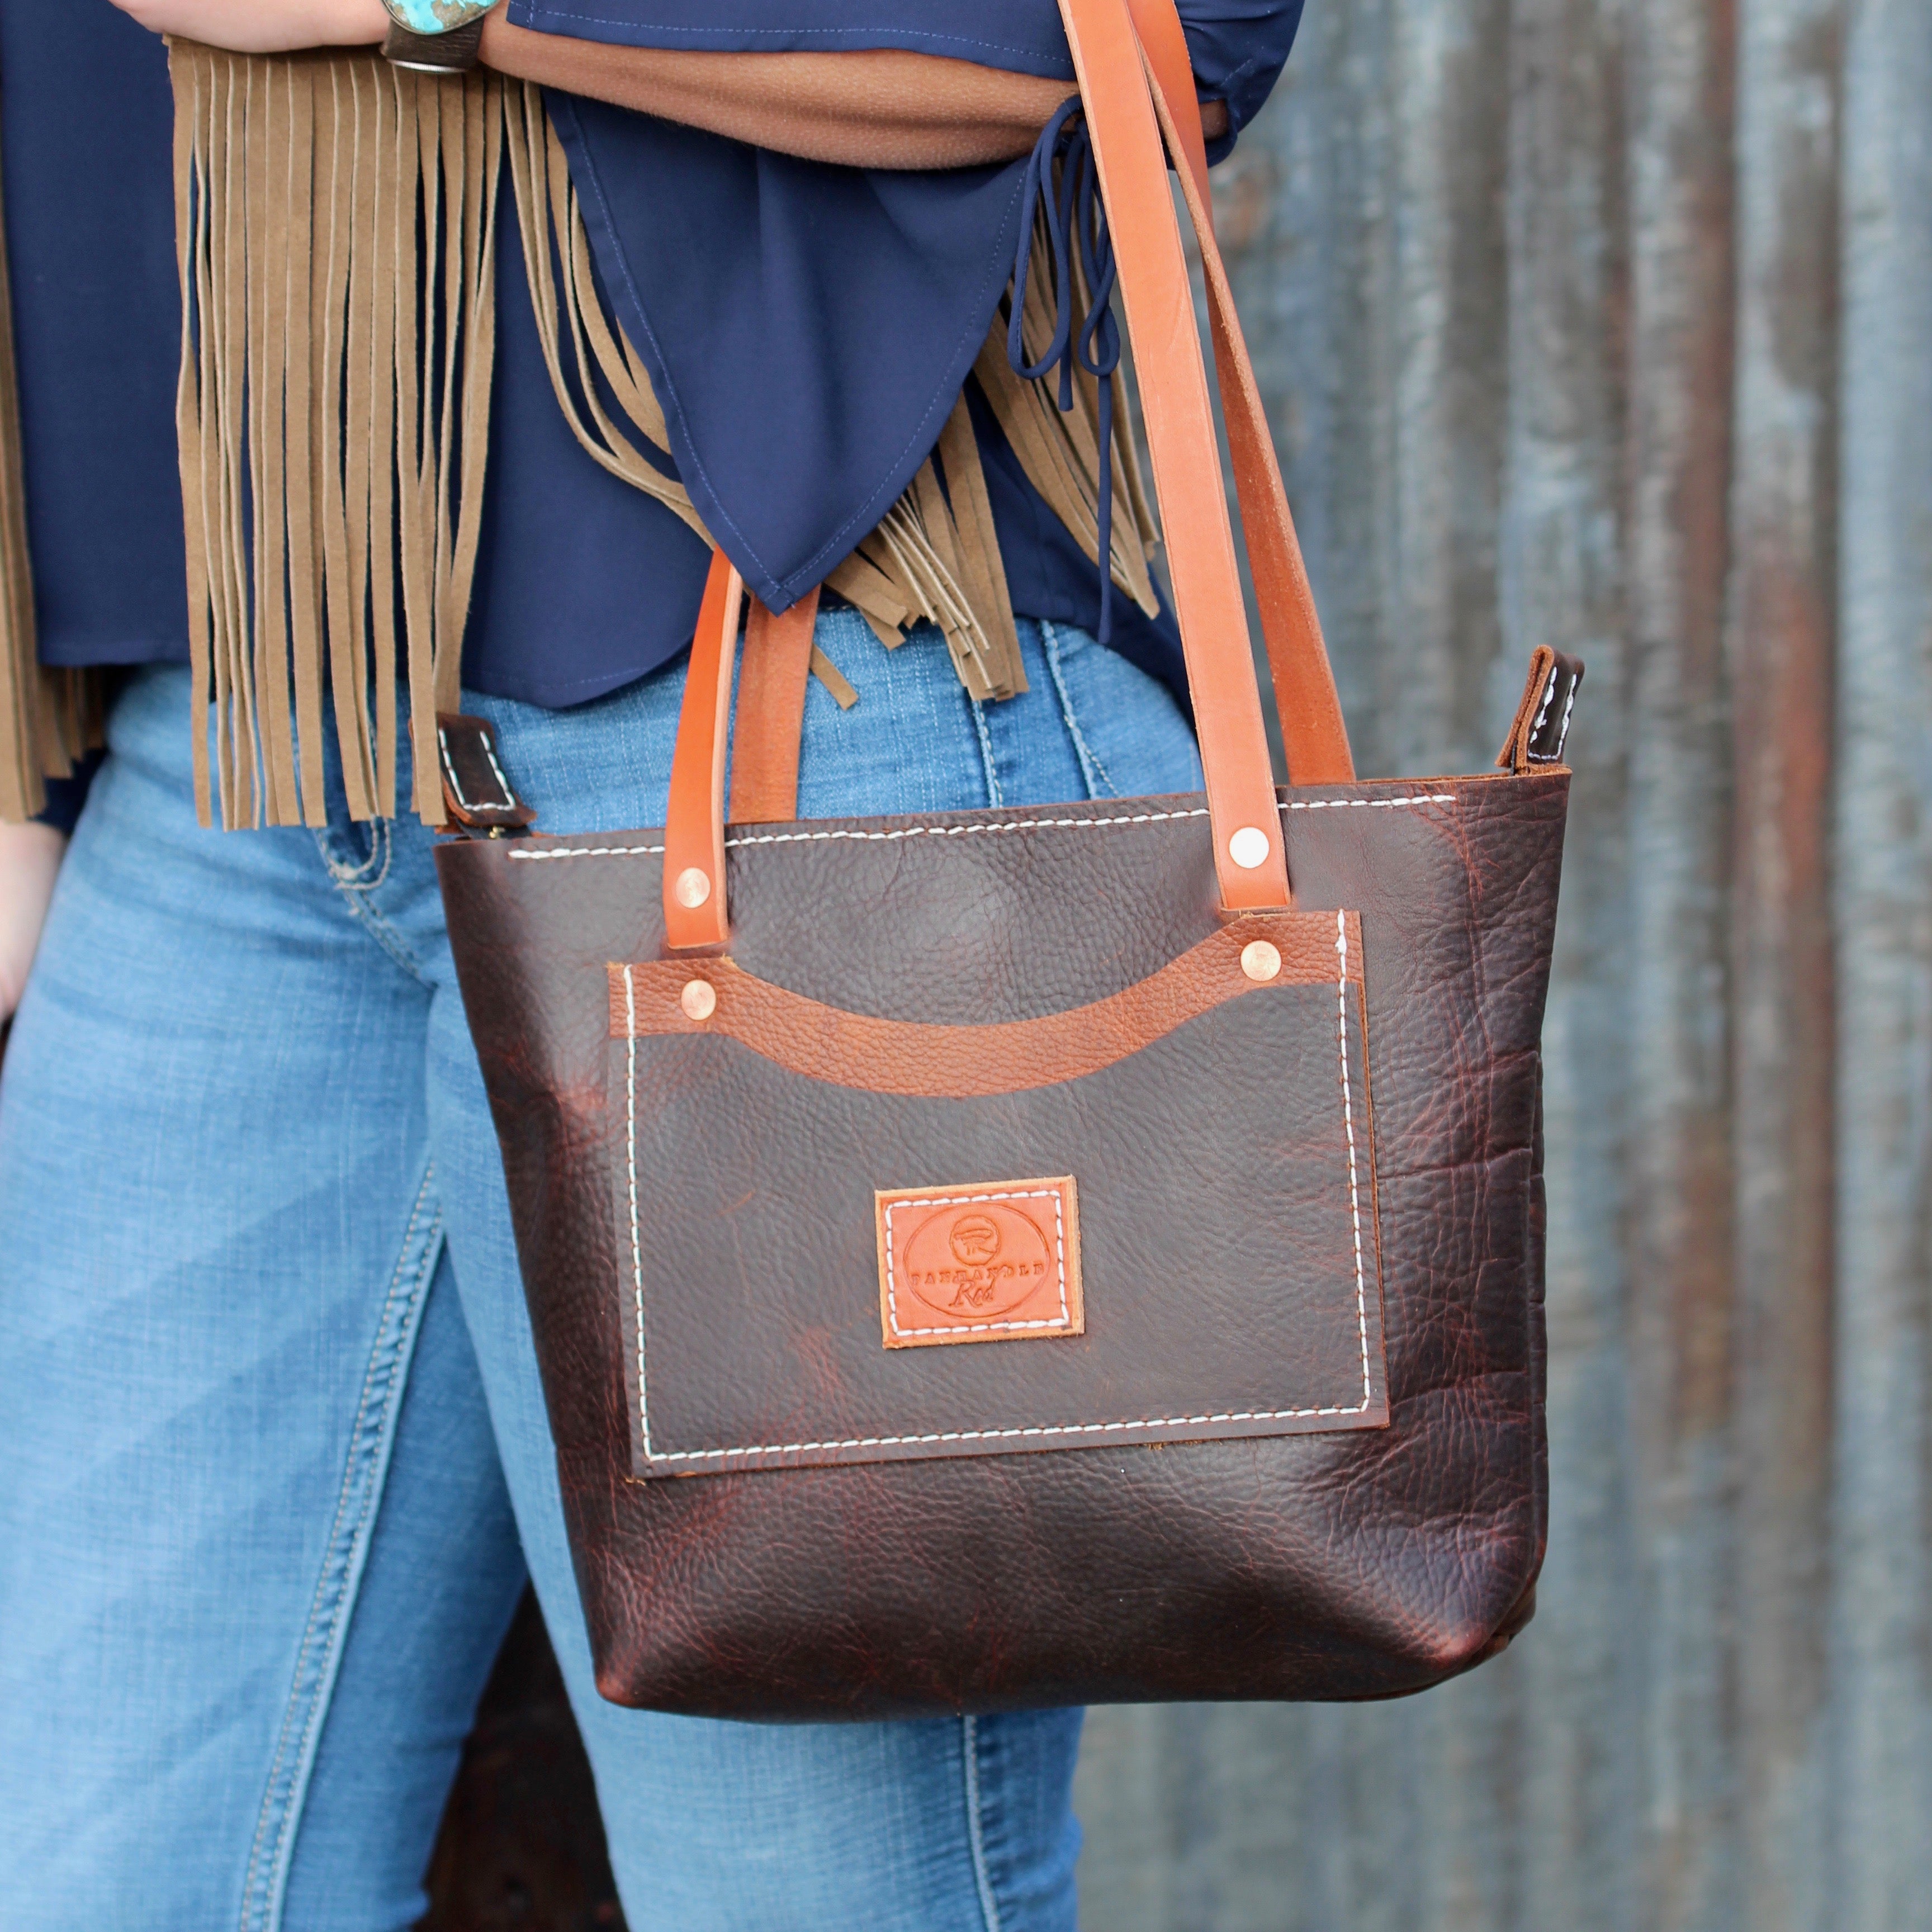 Women's Bags, Accessories & Leather Goods